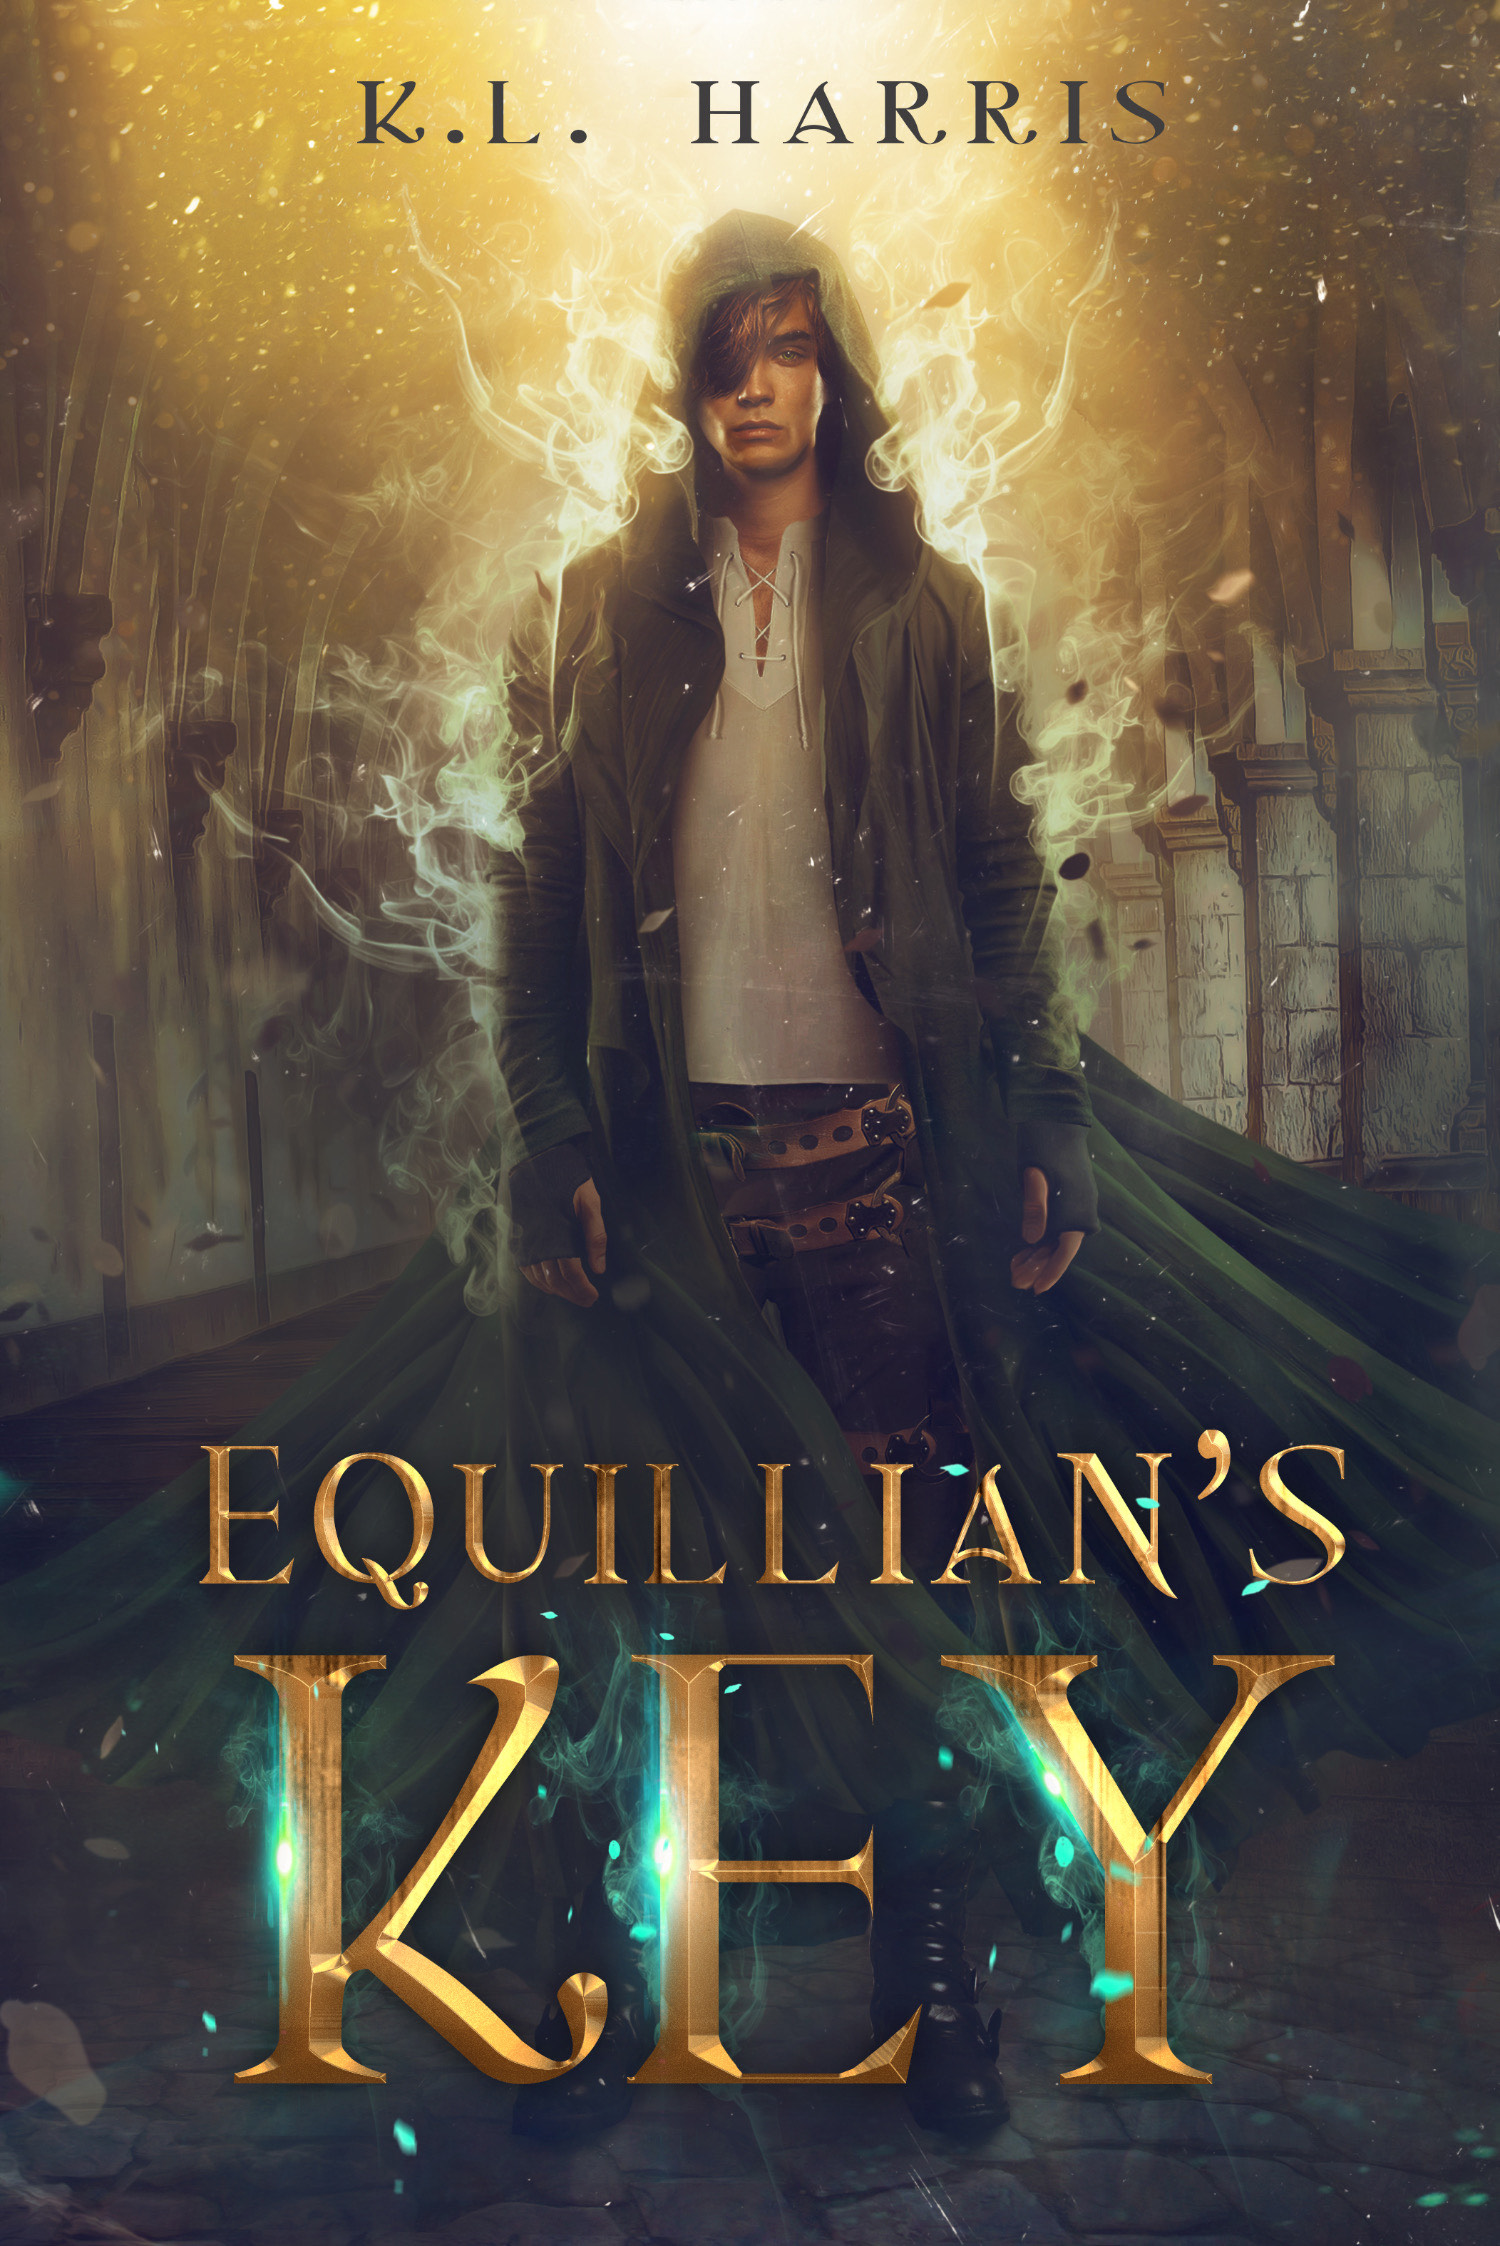 The cover of Kira's book - Equillian's Key